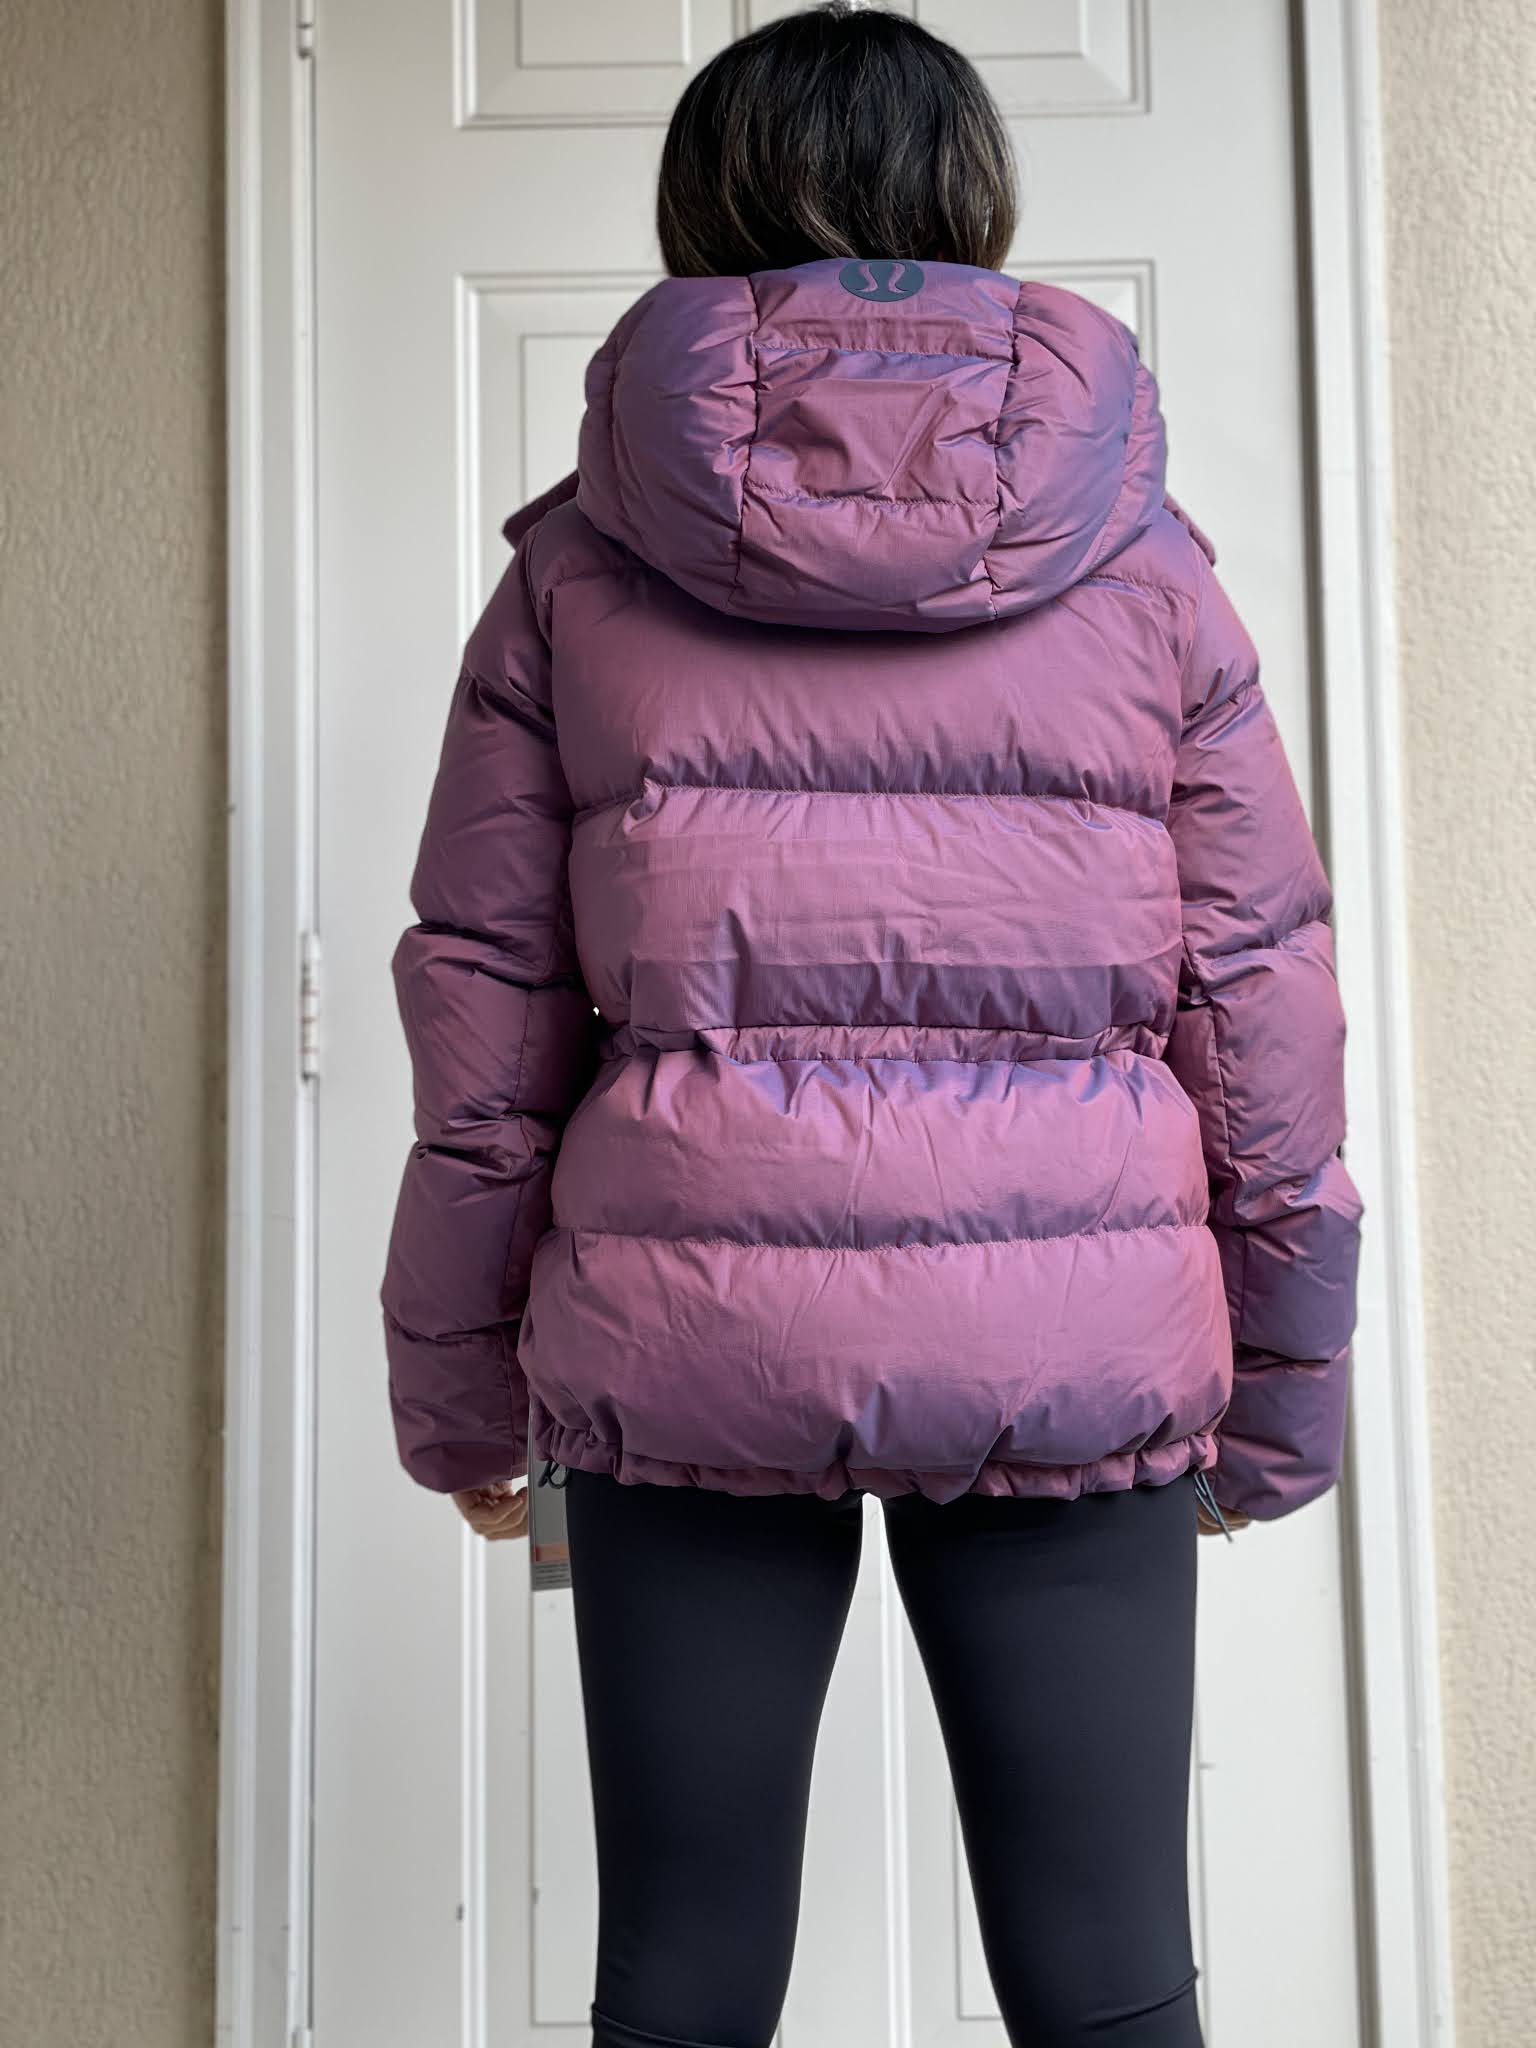 Fit Review Friday! Wunder Puff Jacket Heathered Plumful